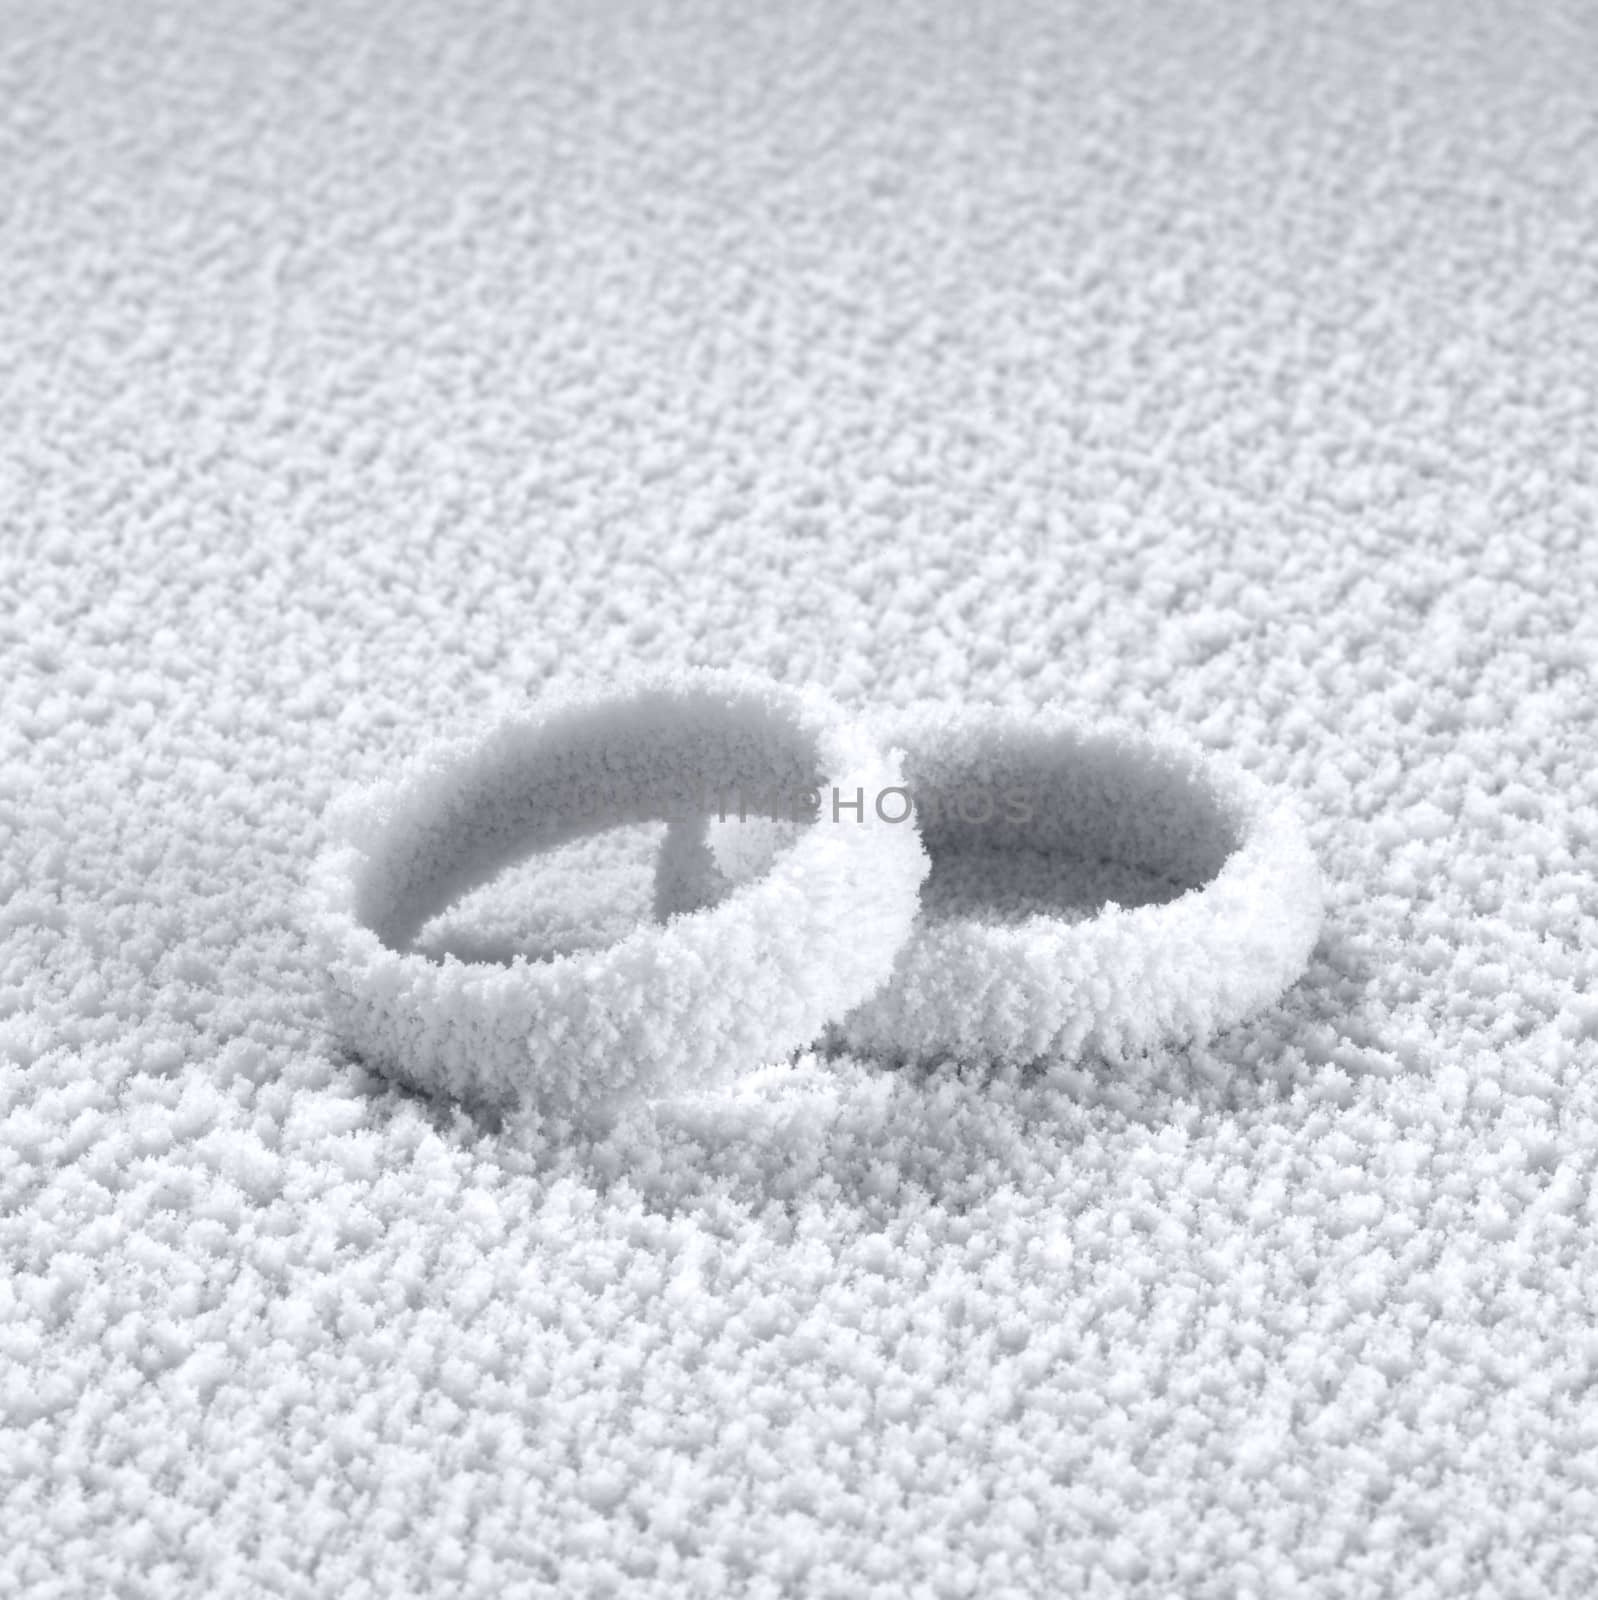 cold wedding rings by gewoldi